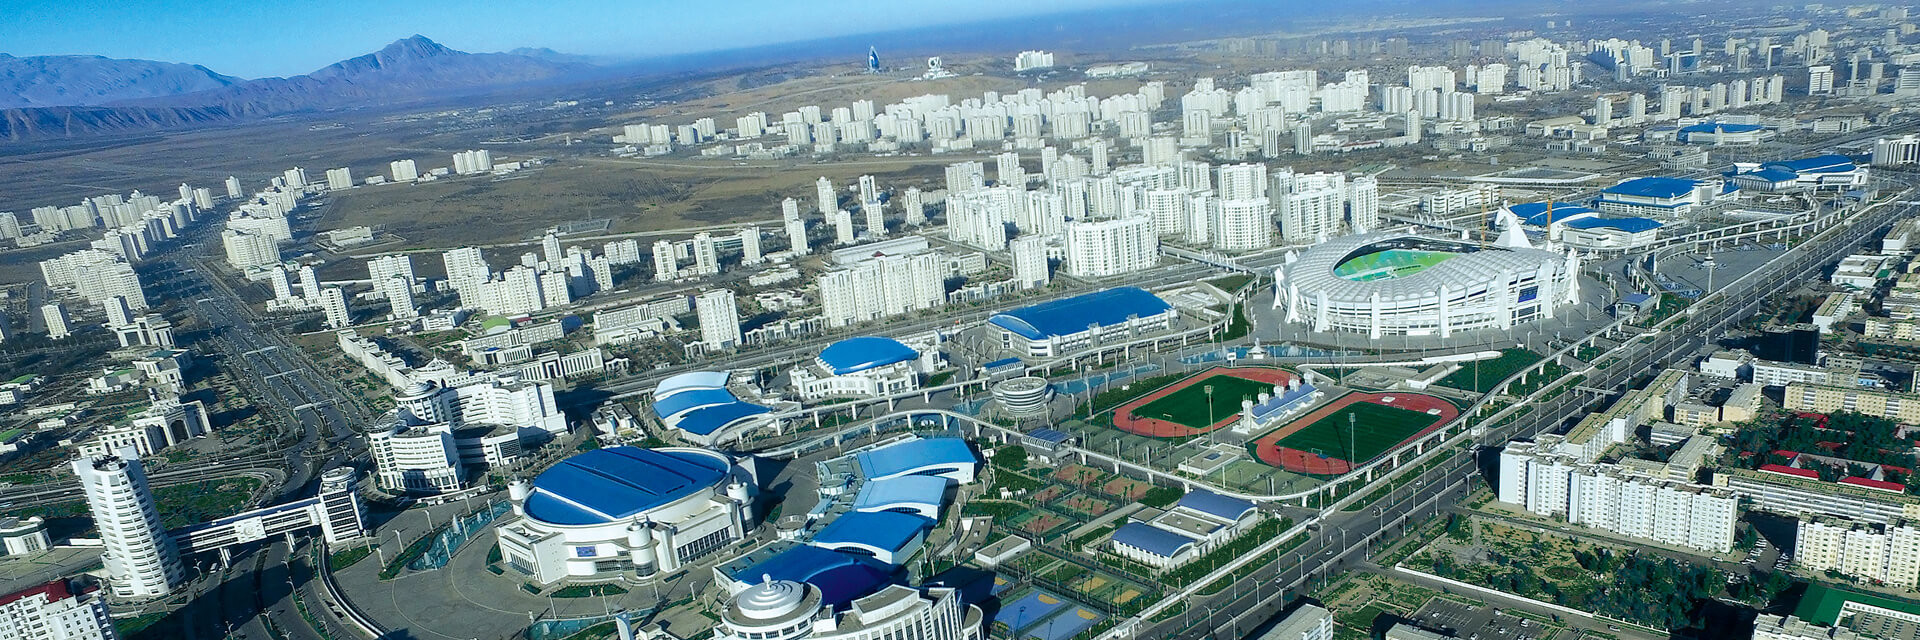 The Ashgabat Olympic Complex will stage the 2017 Asian Indoor and Martial Arts Games ©Ashgabat 2017